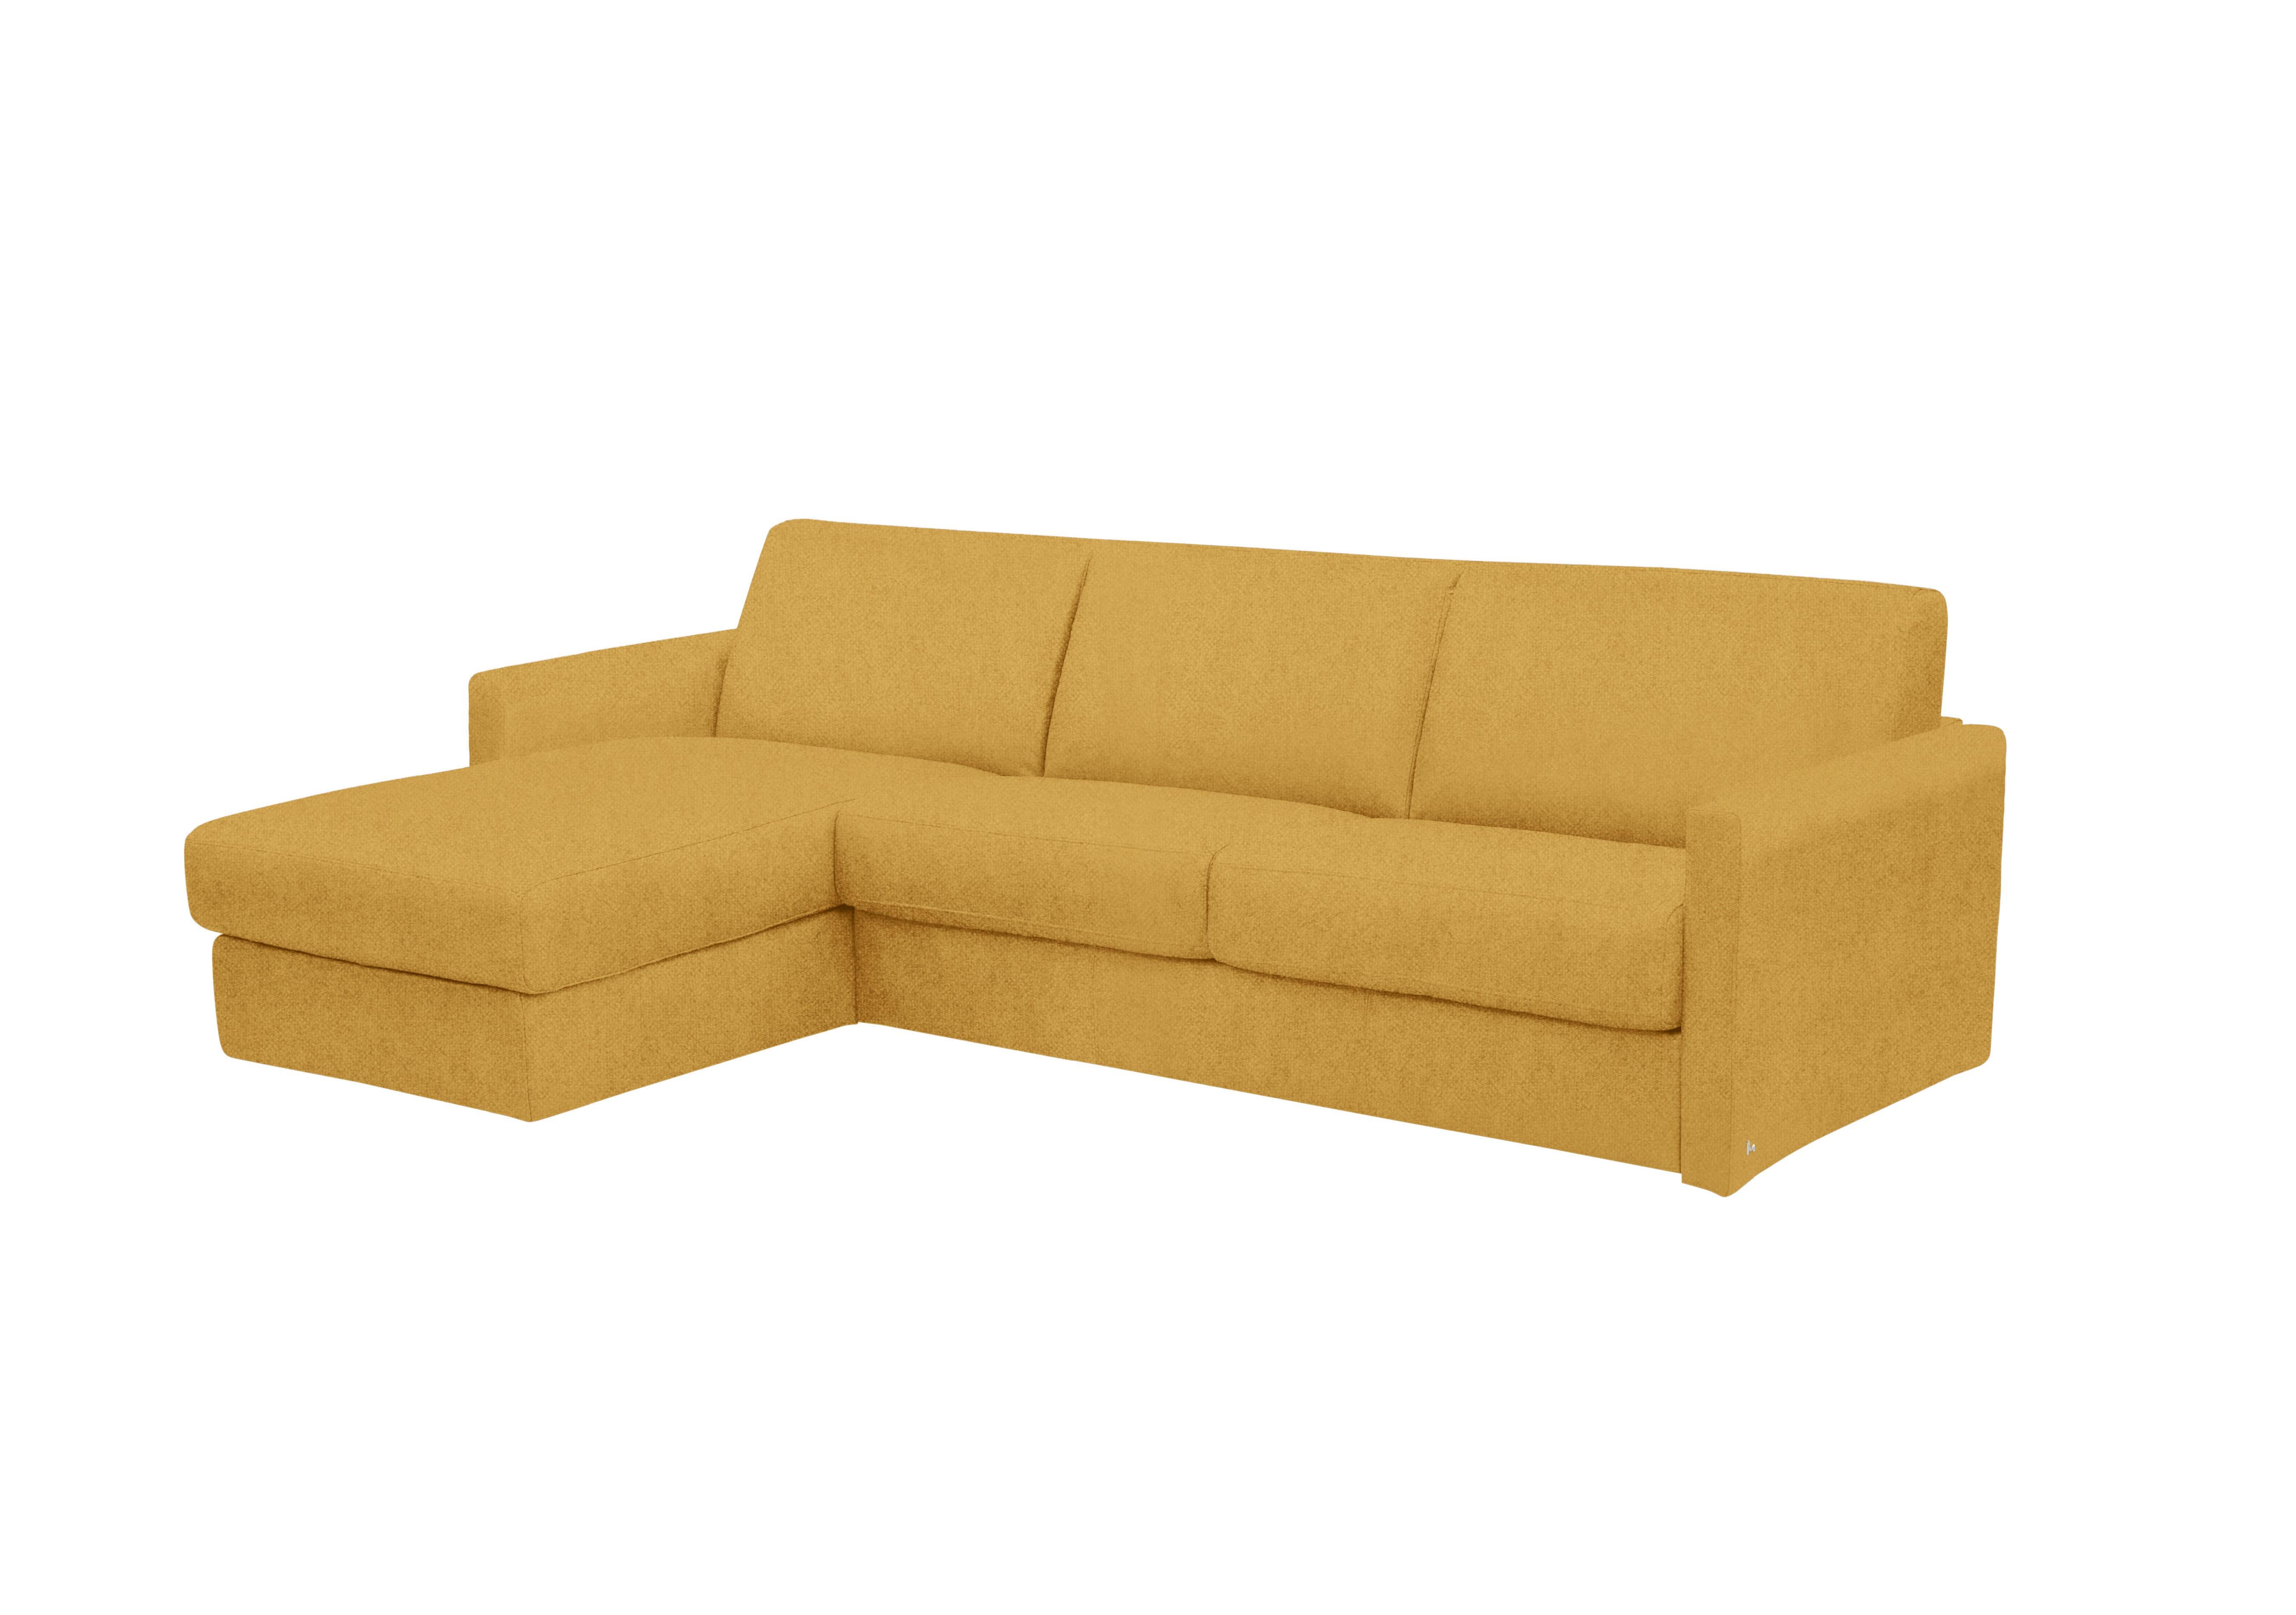 Alcova 3 Seater Fabric Sofa Bed with Storage Chaise with Slim Arms in Fuente Mostaza on Furniture Village